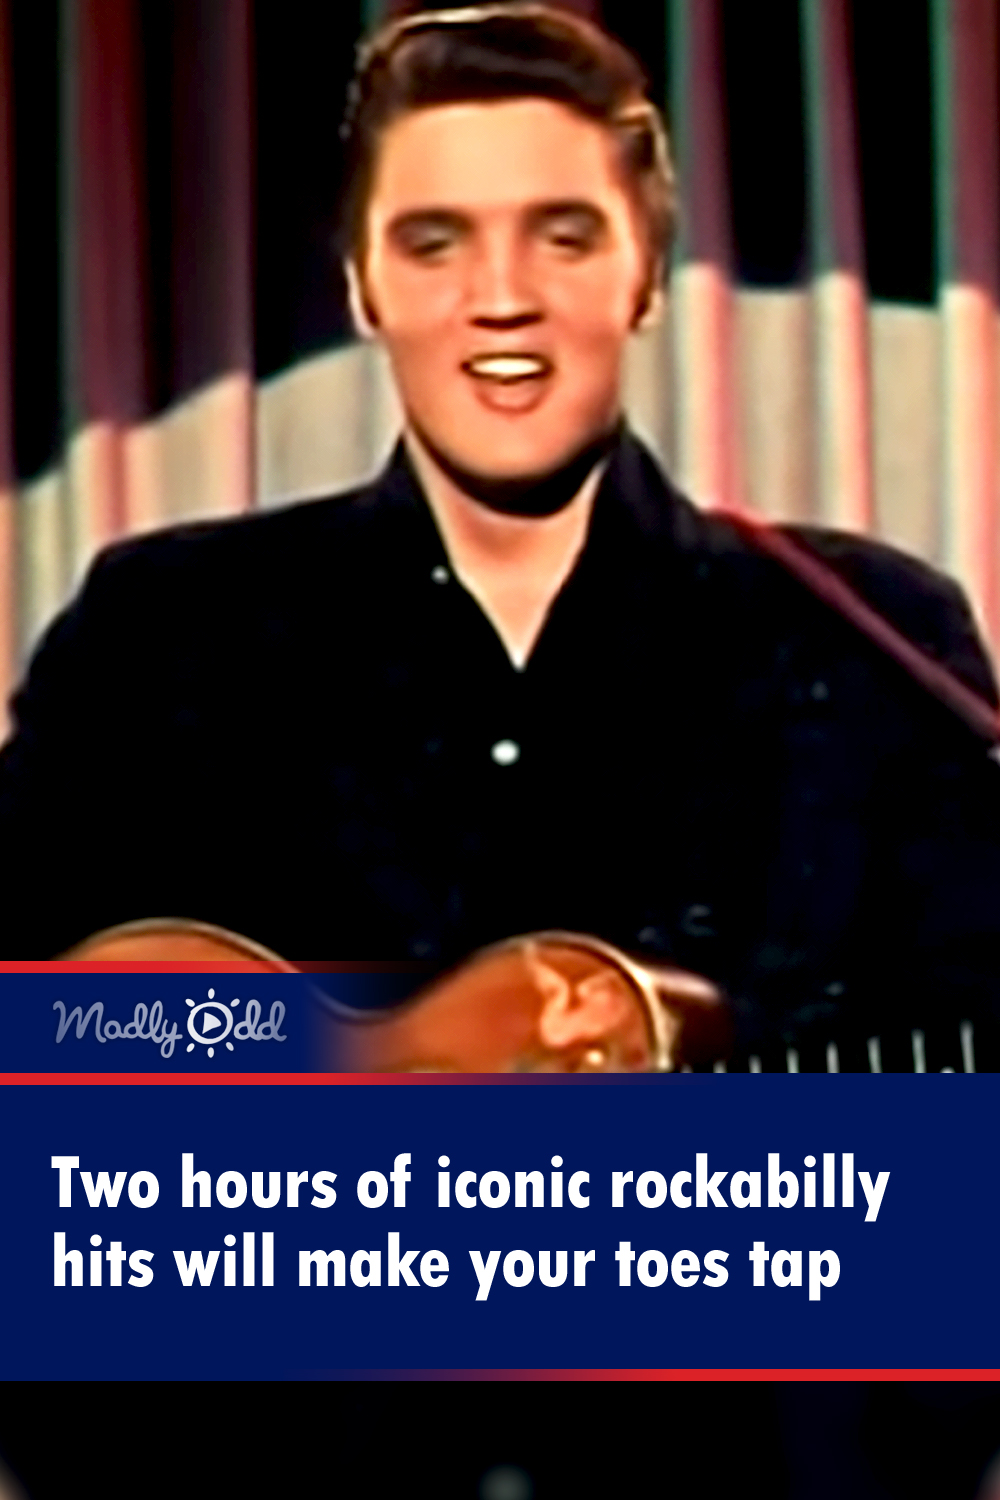 Two hours of iconic rockabilly hits will make your toes tap